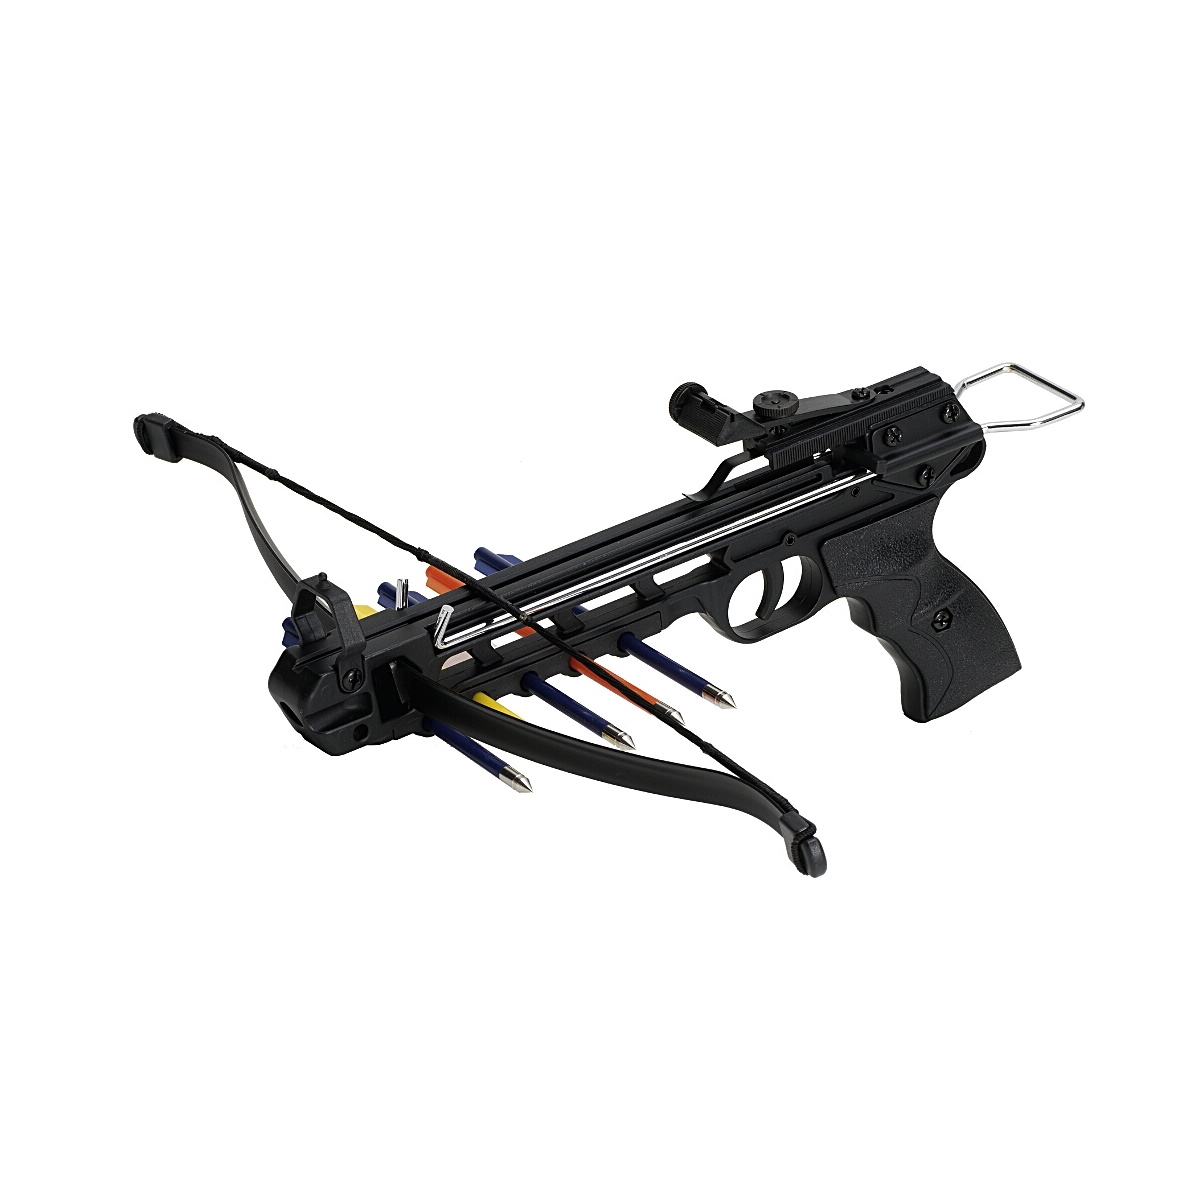 Picture of Man Kung - Crossbow Pistol 50 lbs